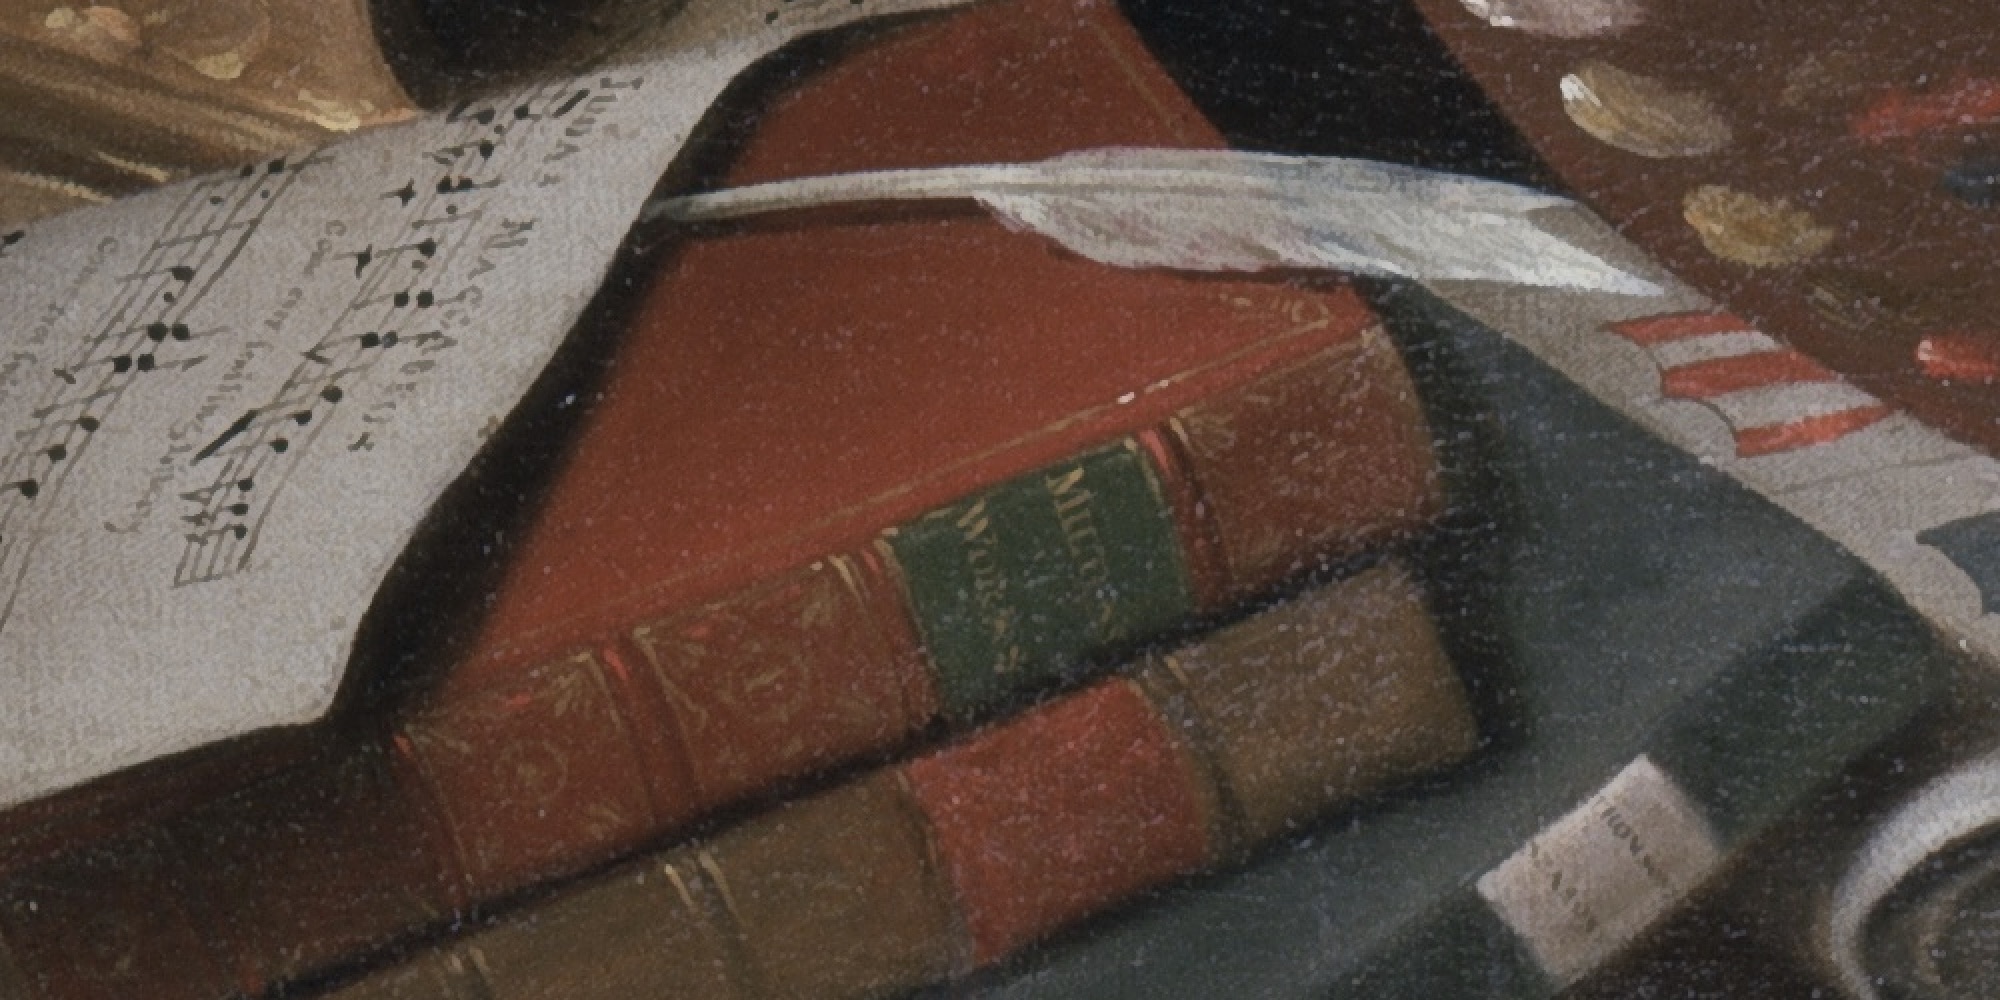 This detail from the painting depicts books dealing with freedom and slavery, related thematically to imagining the abolition of slavery.